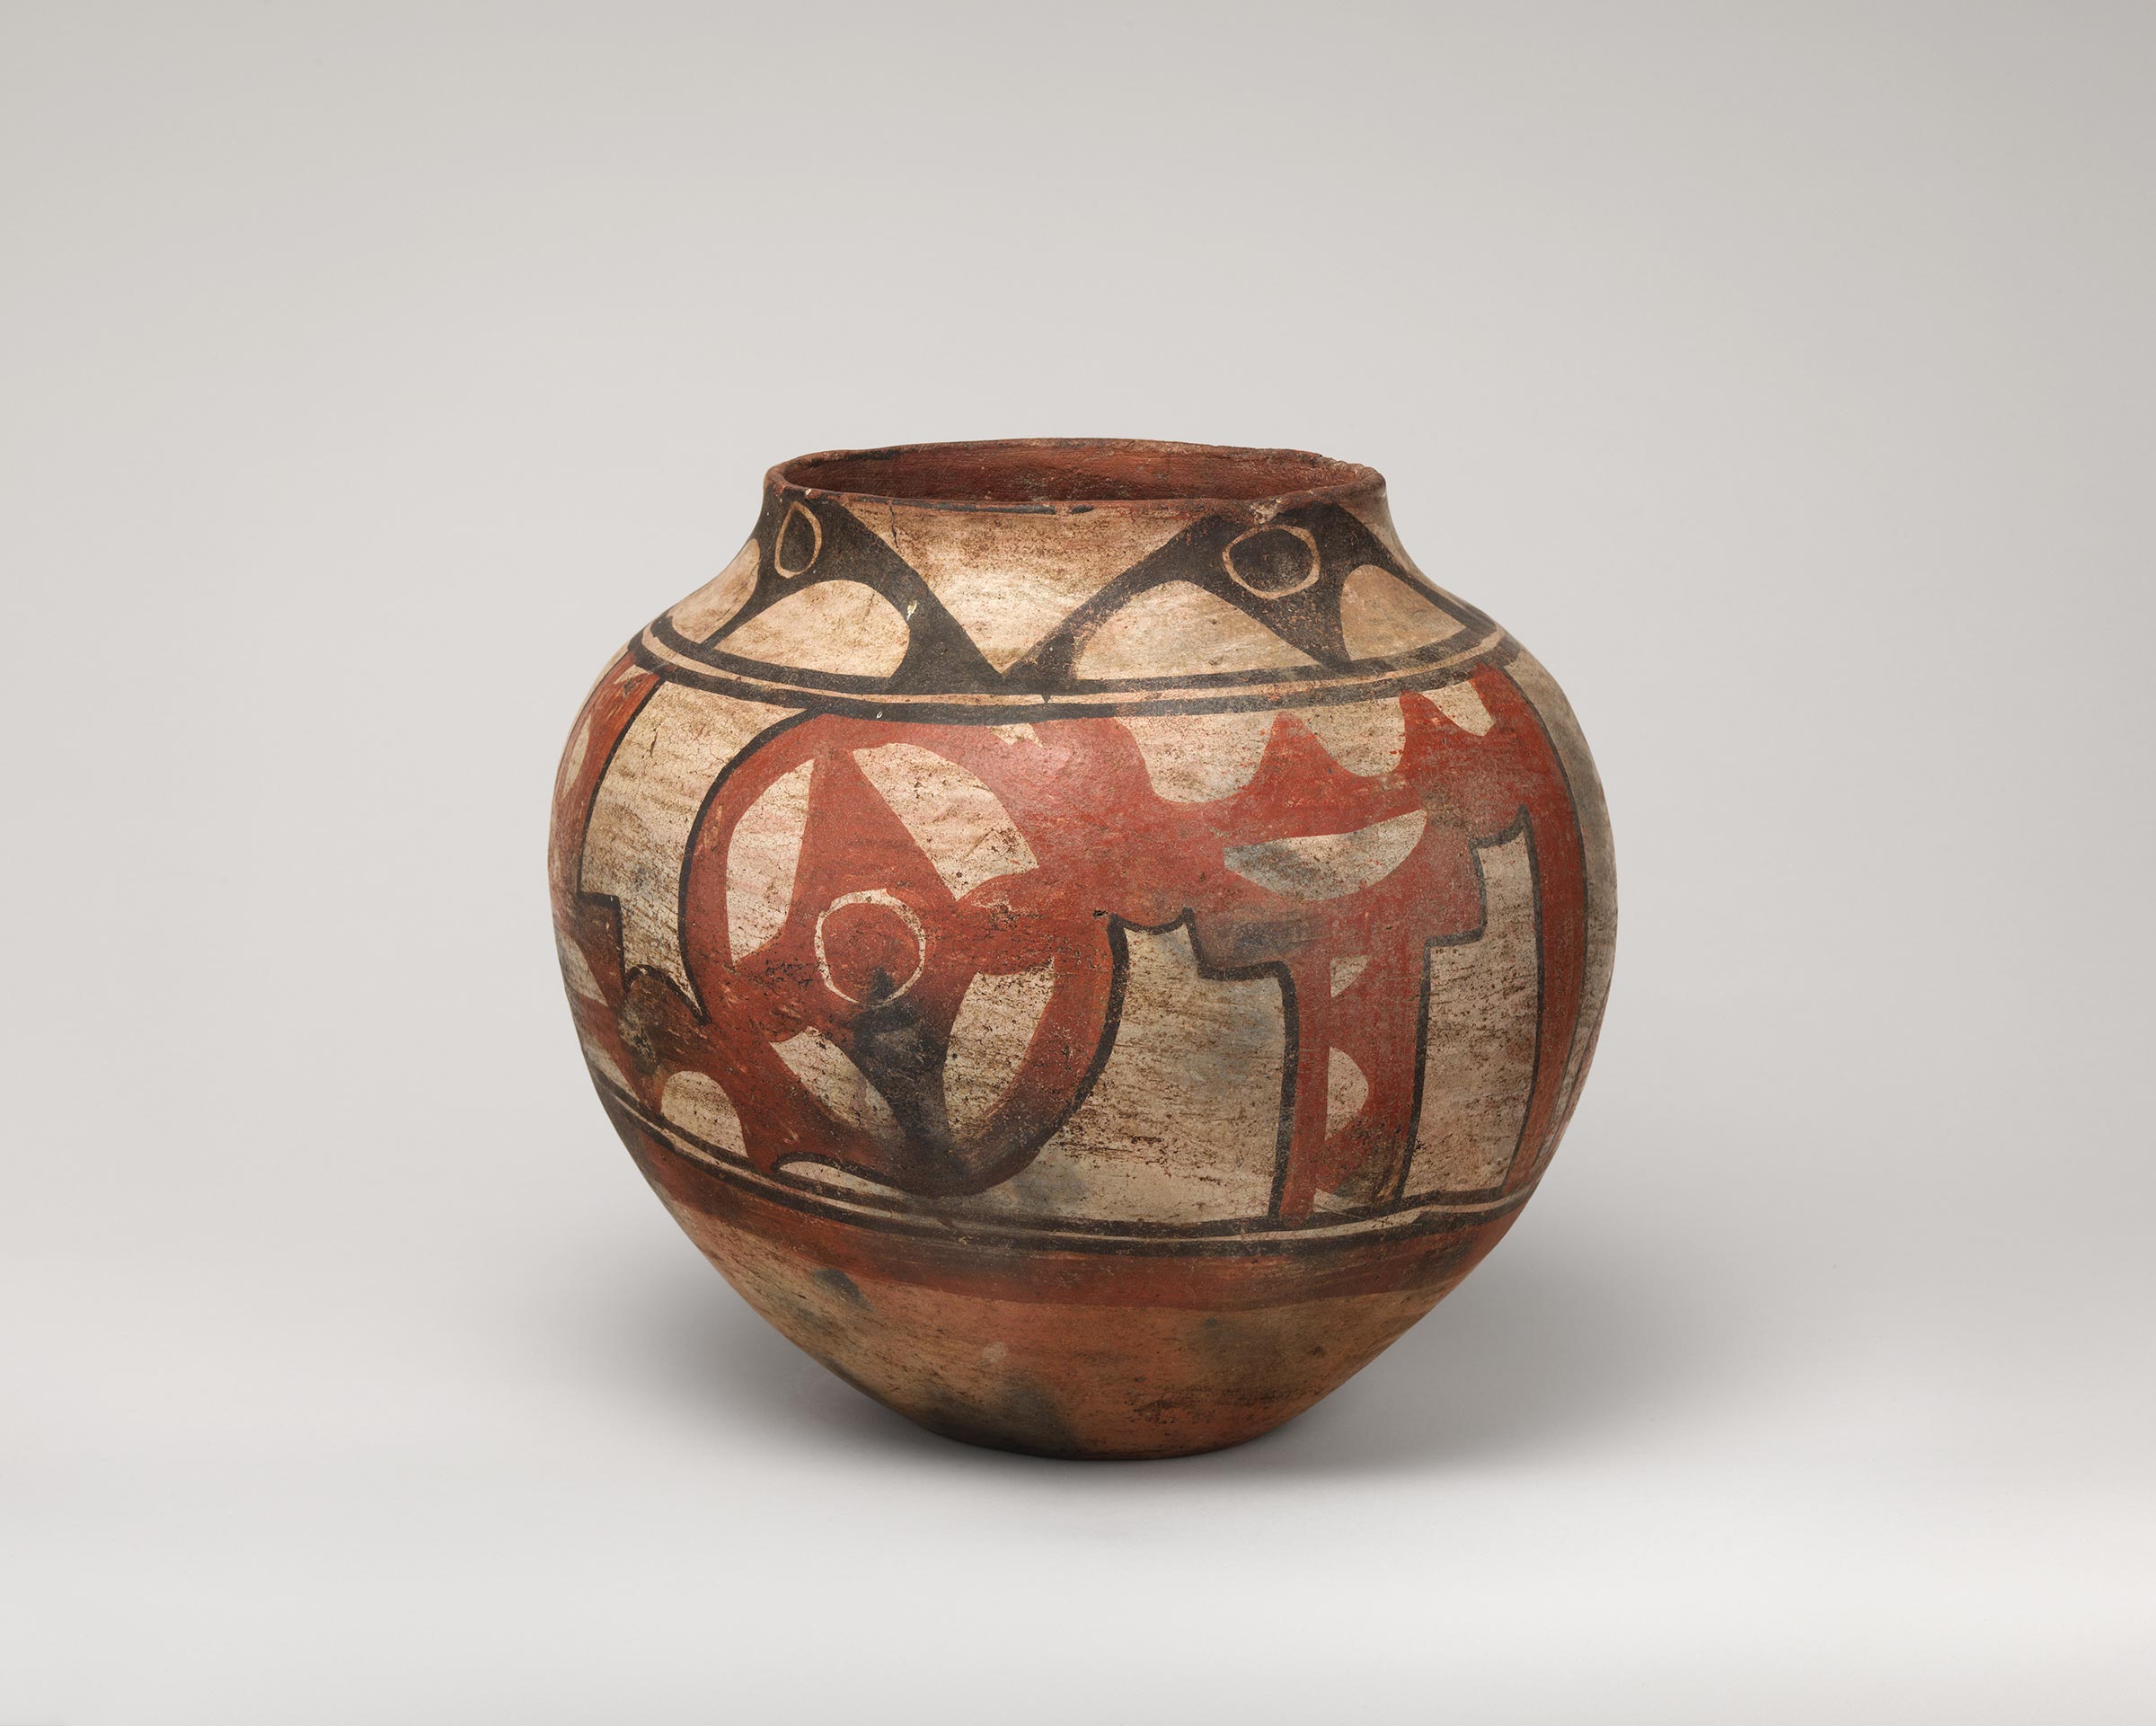 Santa Ana polychrome water jar featuring white slip with black and red painted decoration.